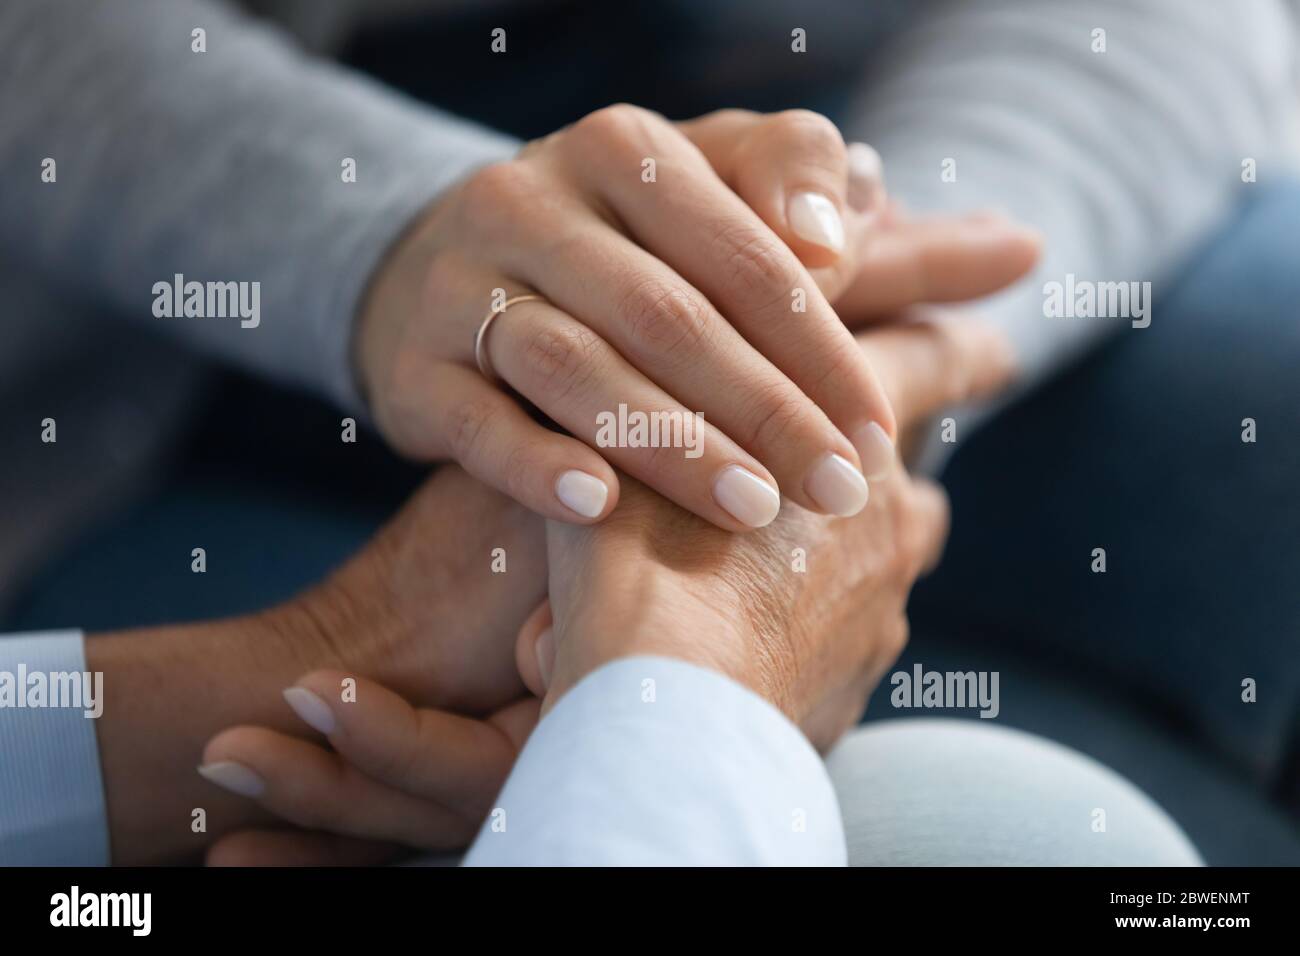 Adult daughter holding mothers hand close up image Stock Photo